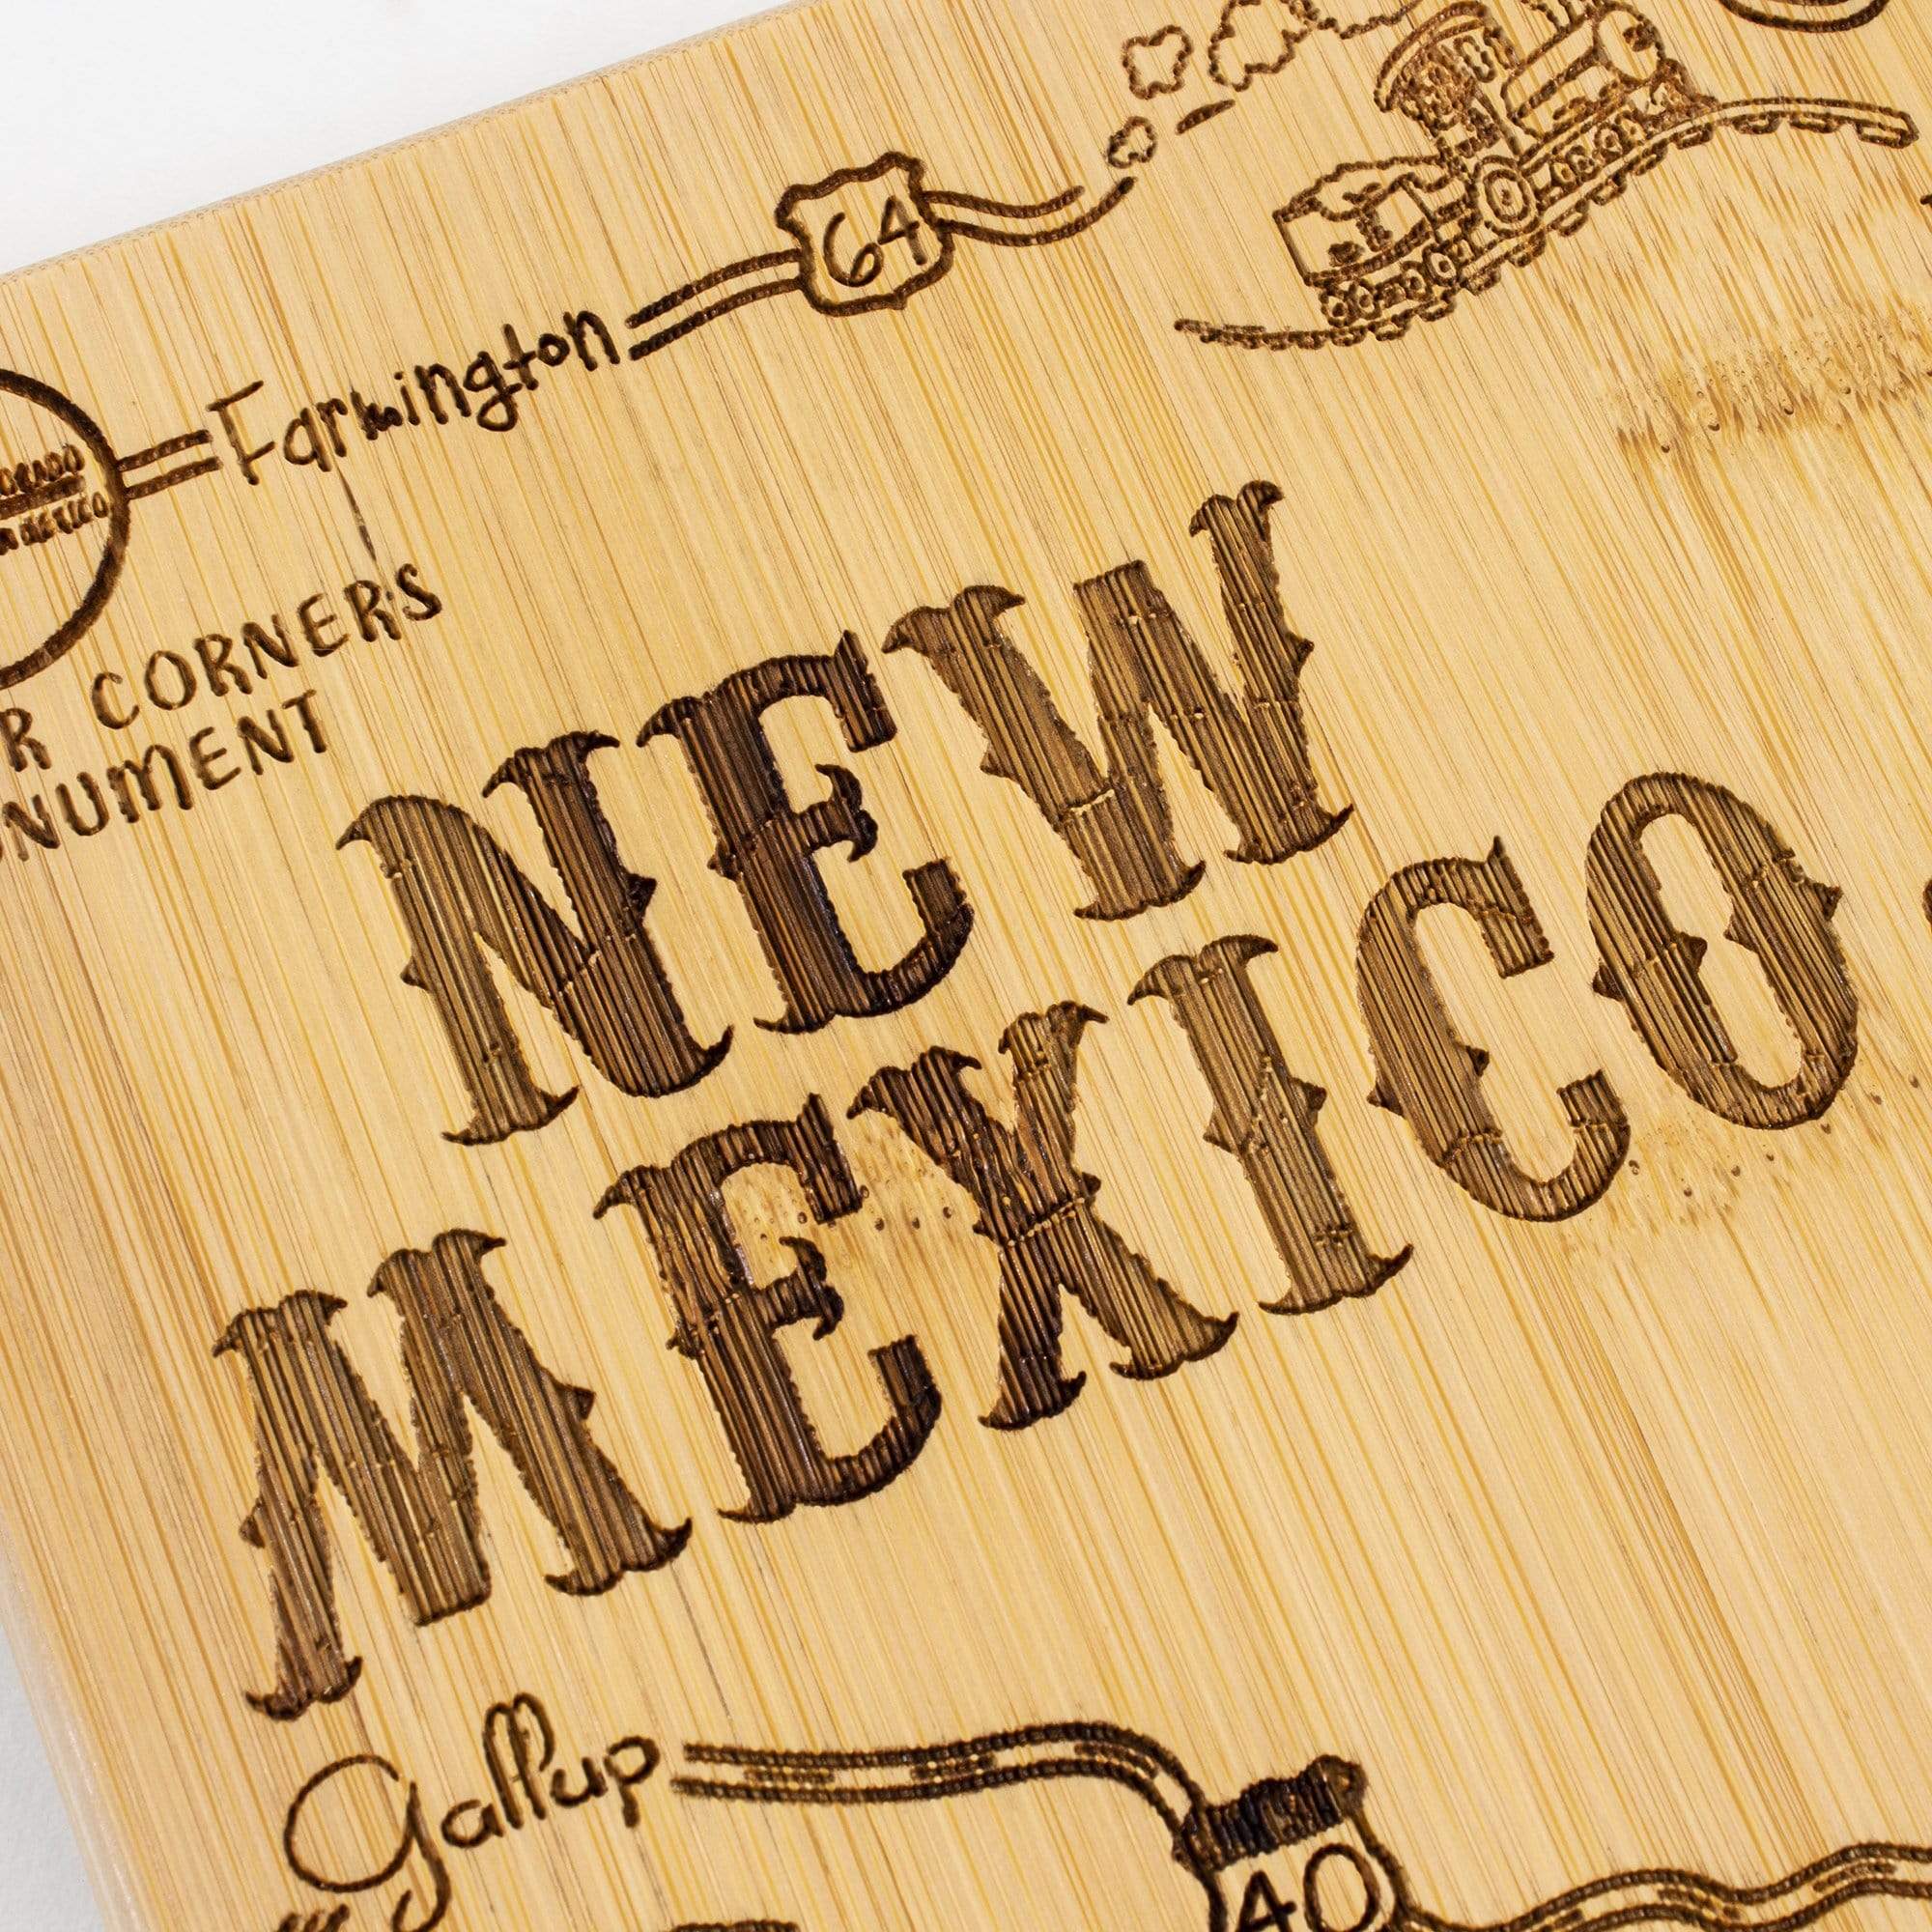 New Mexico Wood Cutting Permits